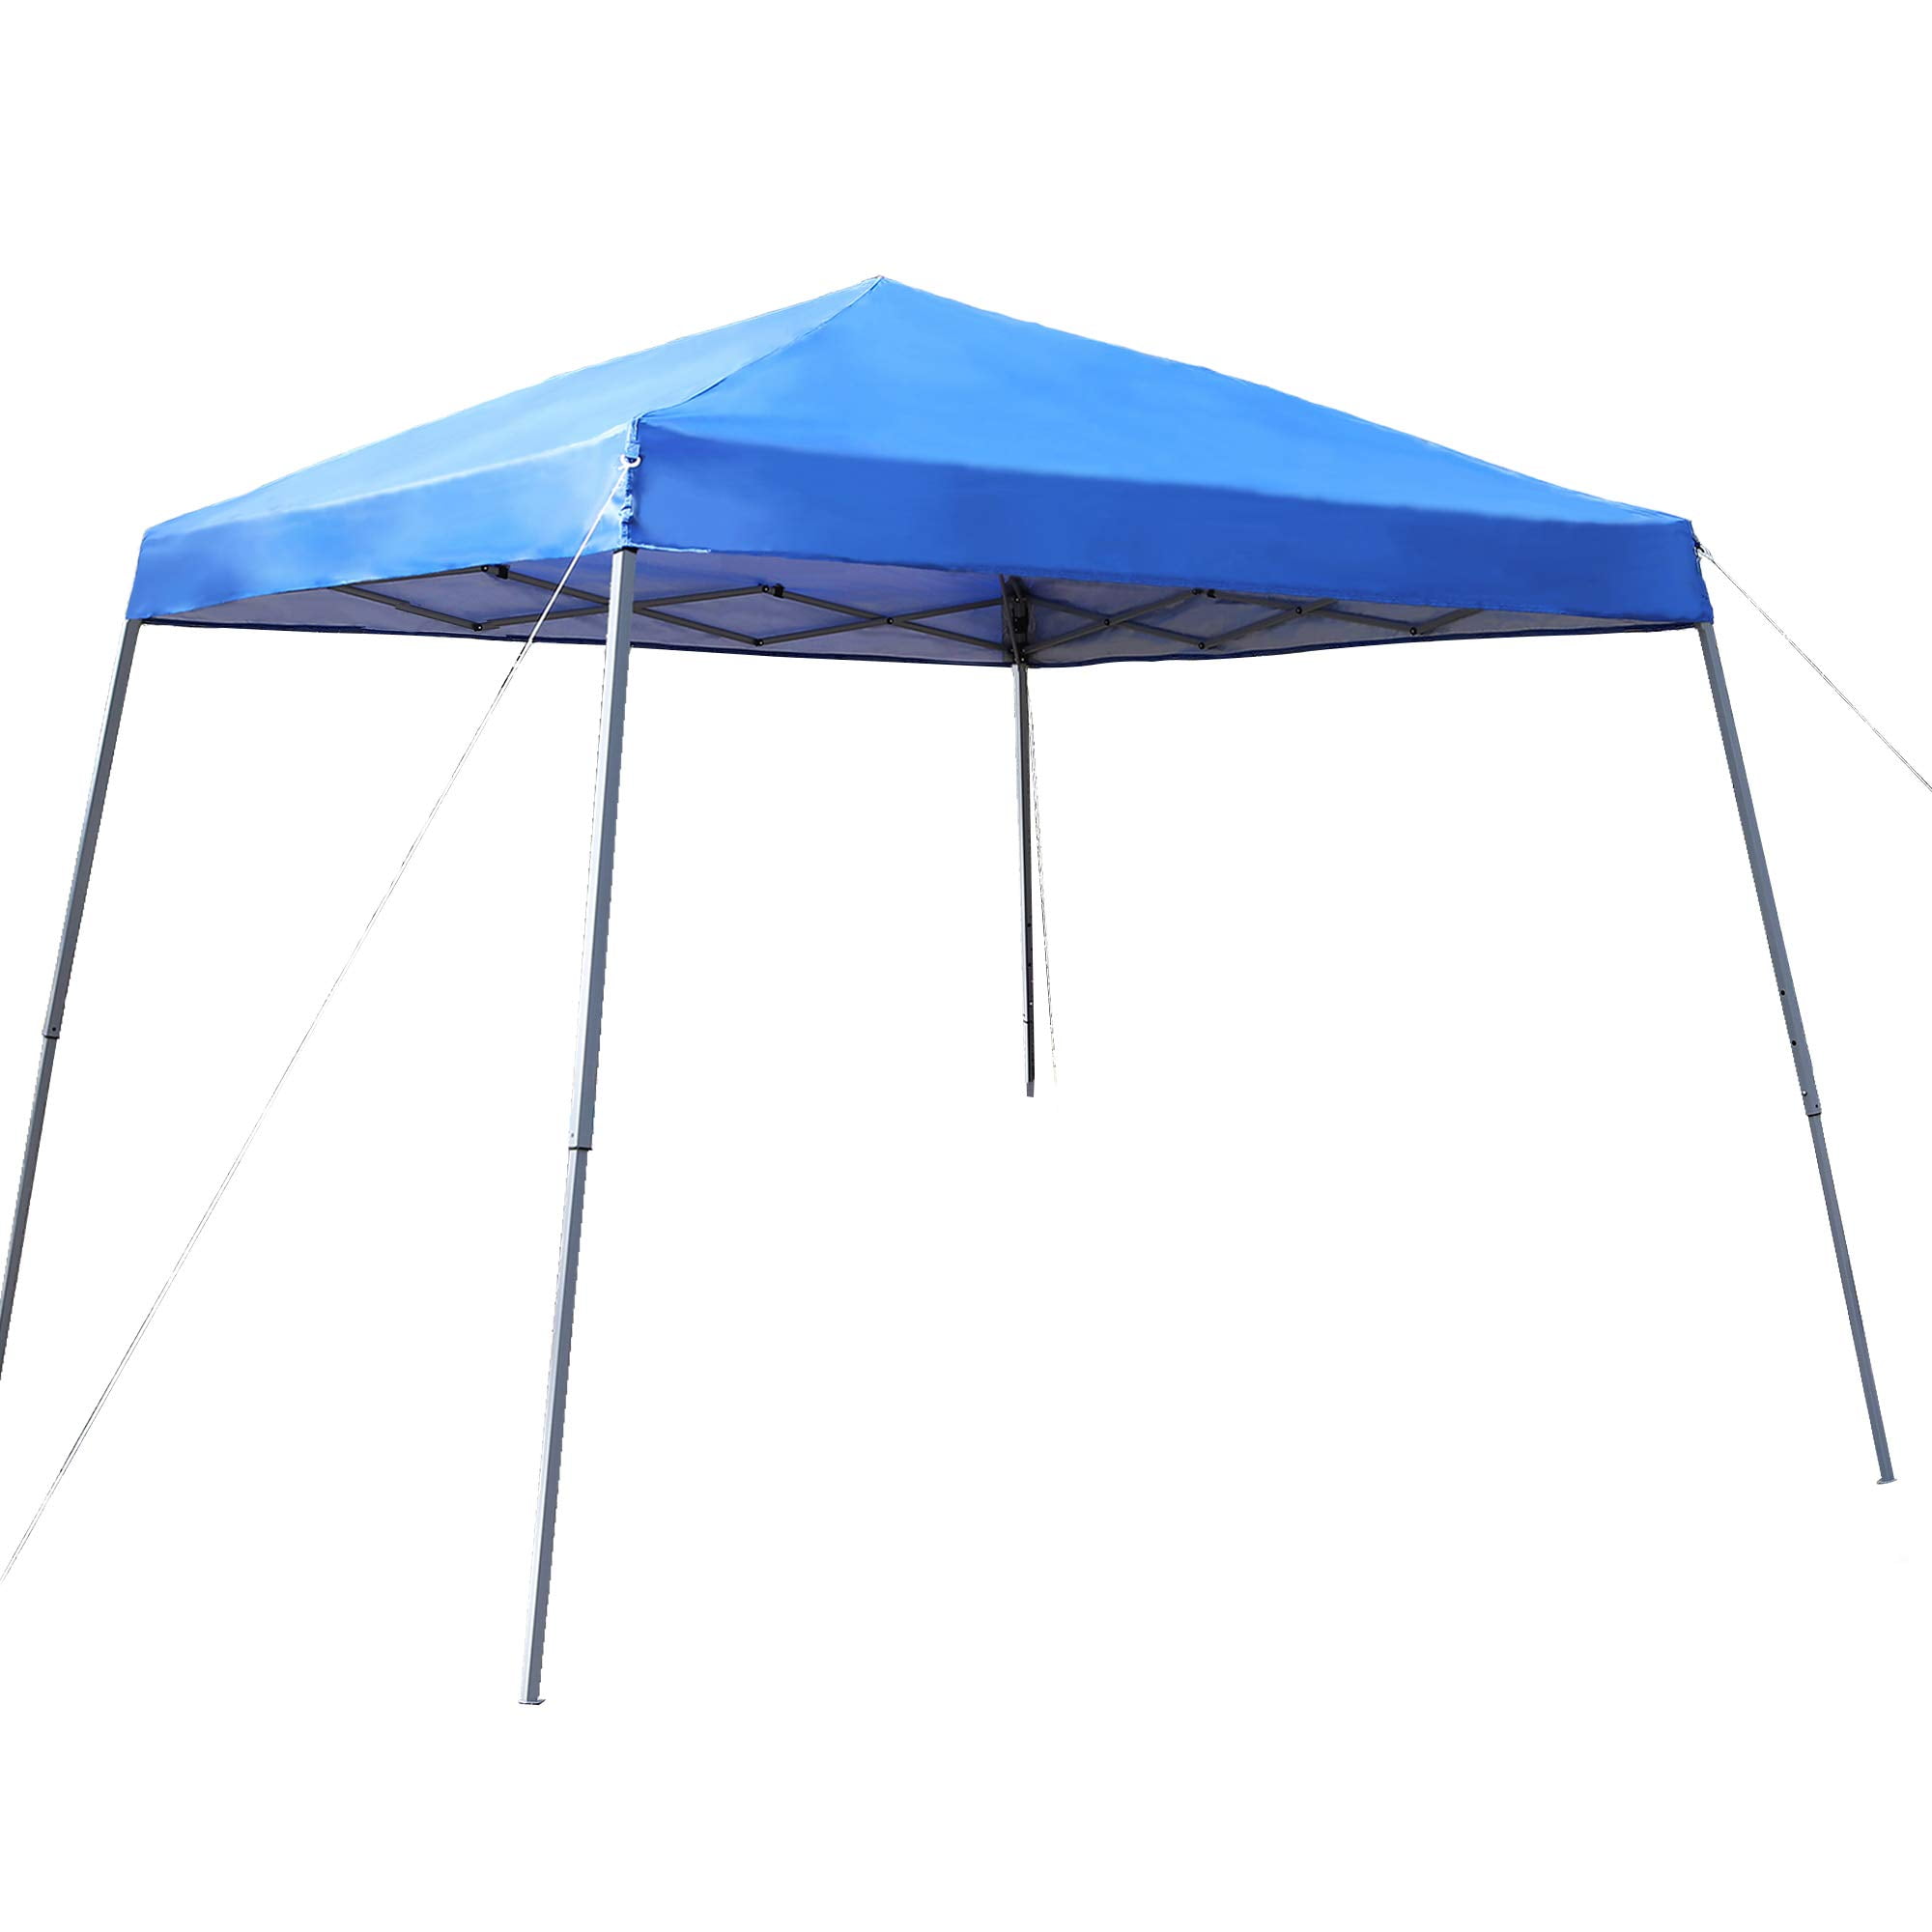 Sportcraft 12 X 12 Instant Canopy With Slanted Legs Blue 81 Sq Ft Uv Protection 